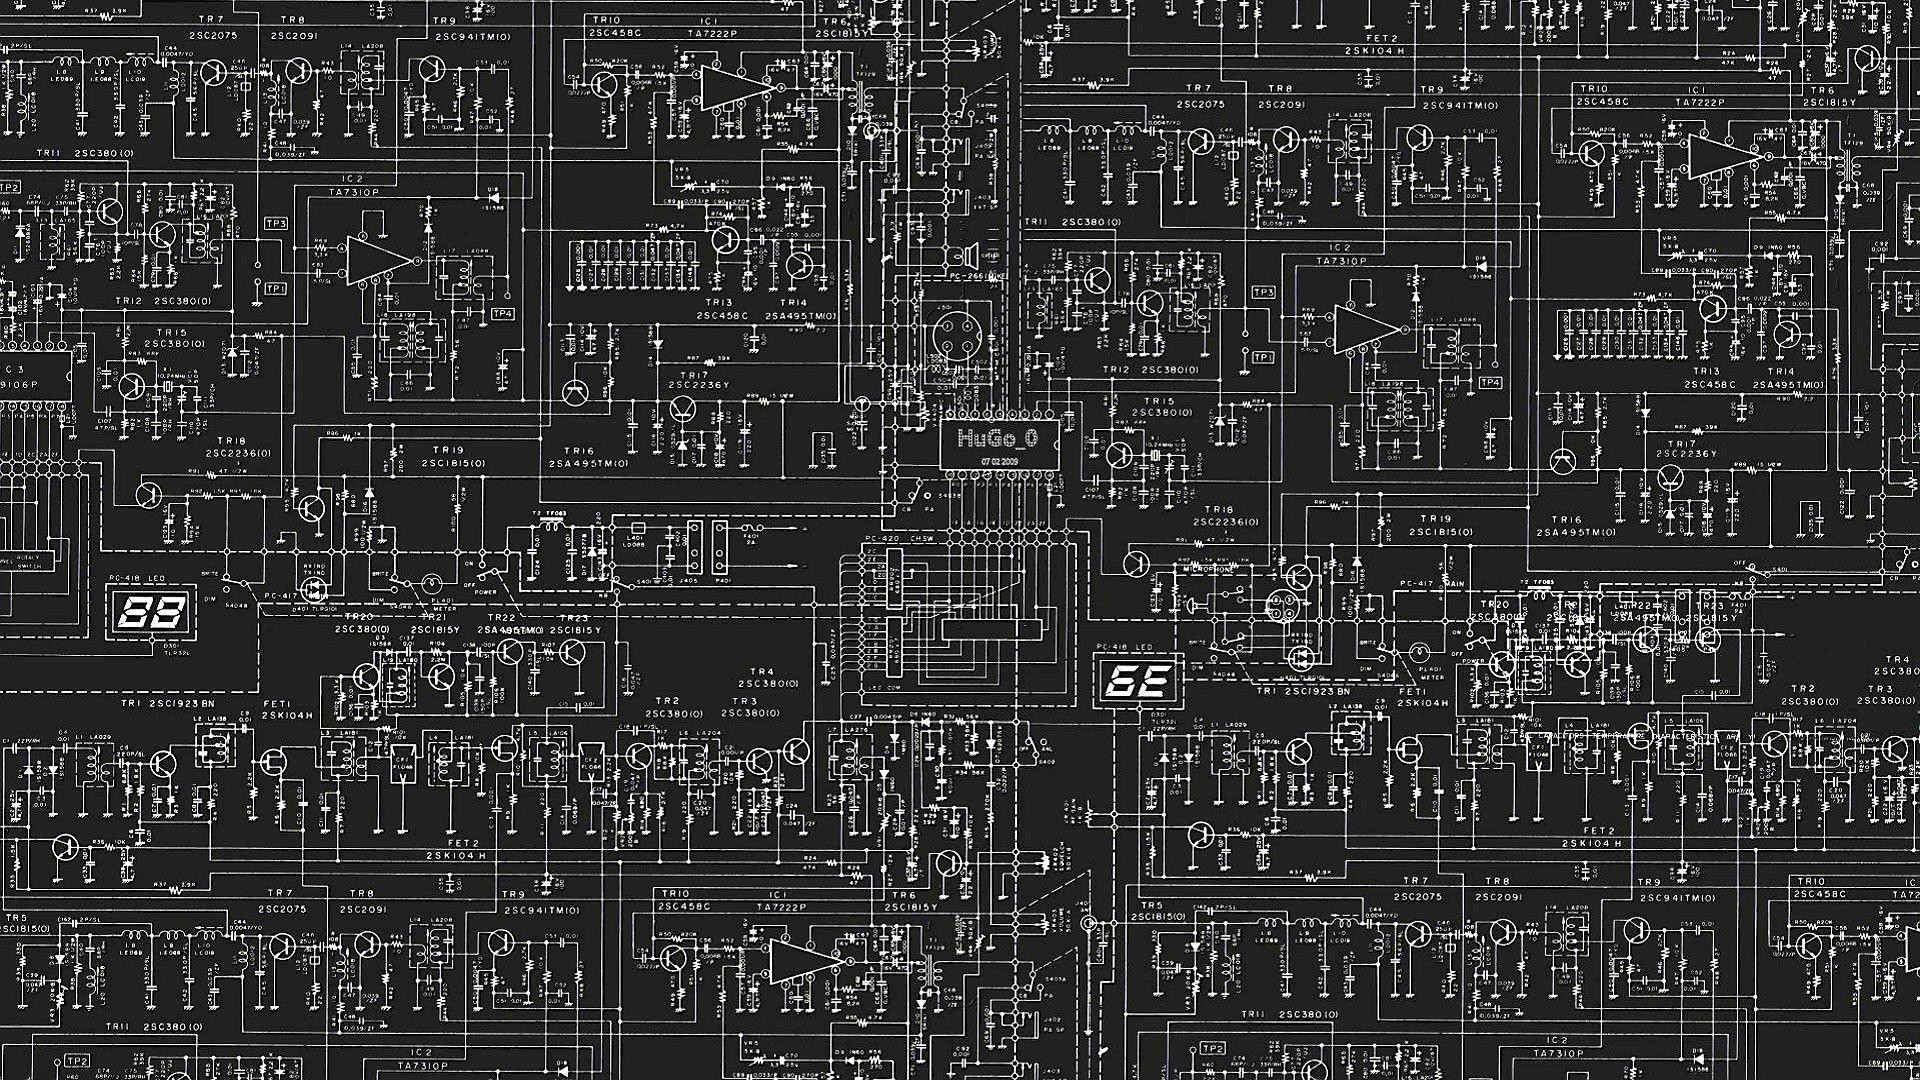 Computer Science Wallpaper (Picture)